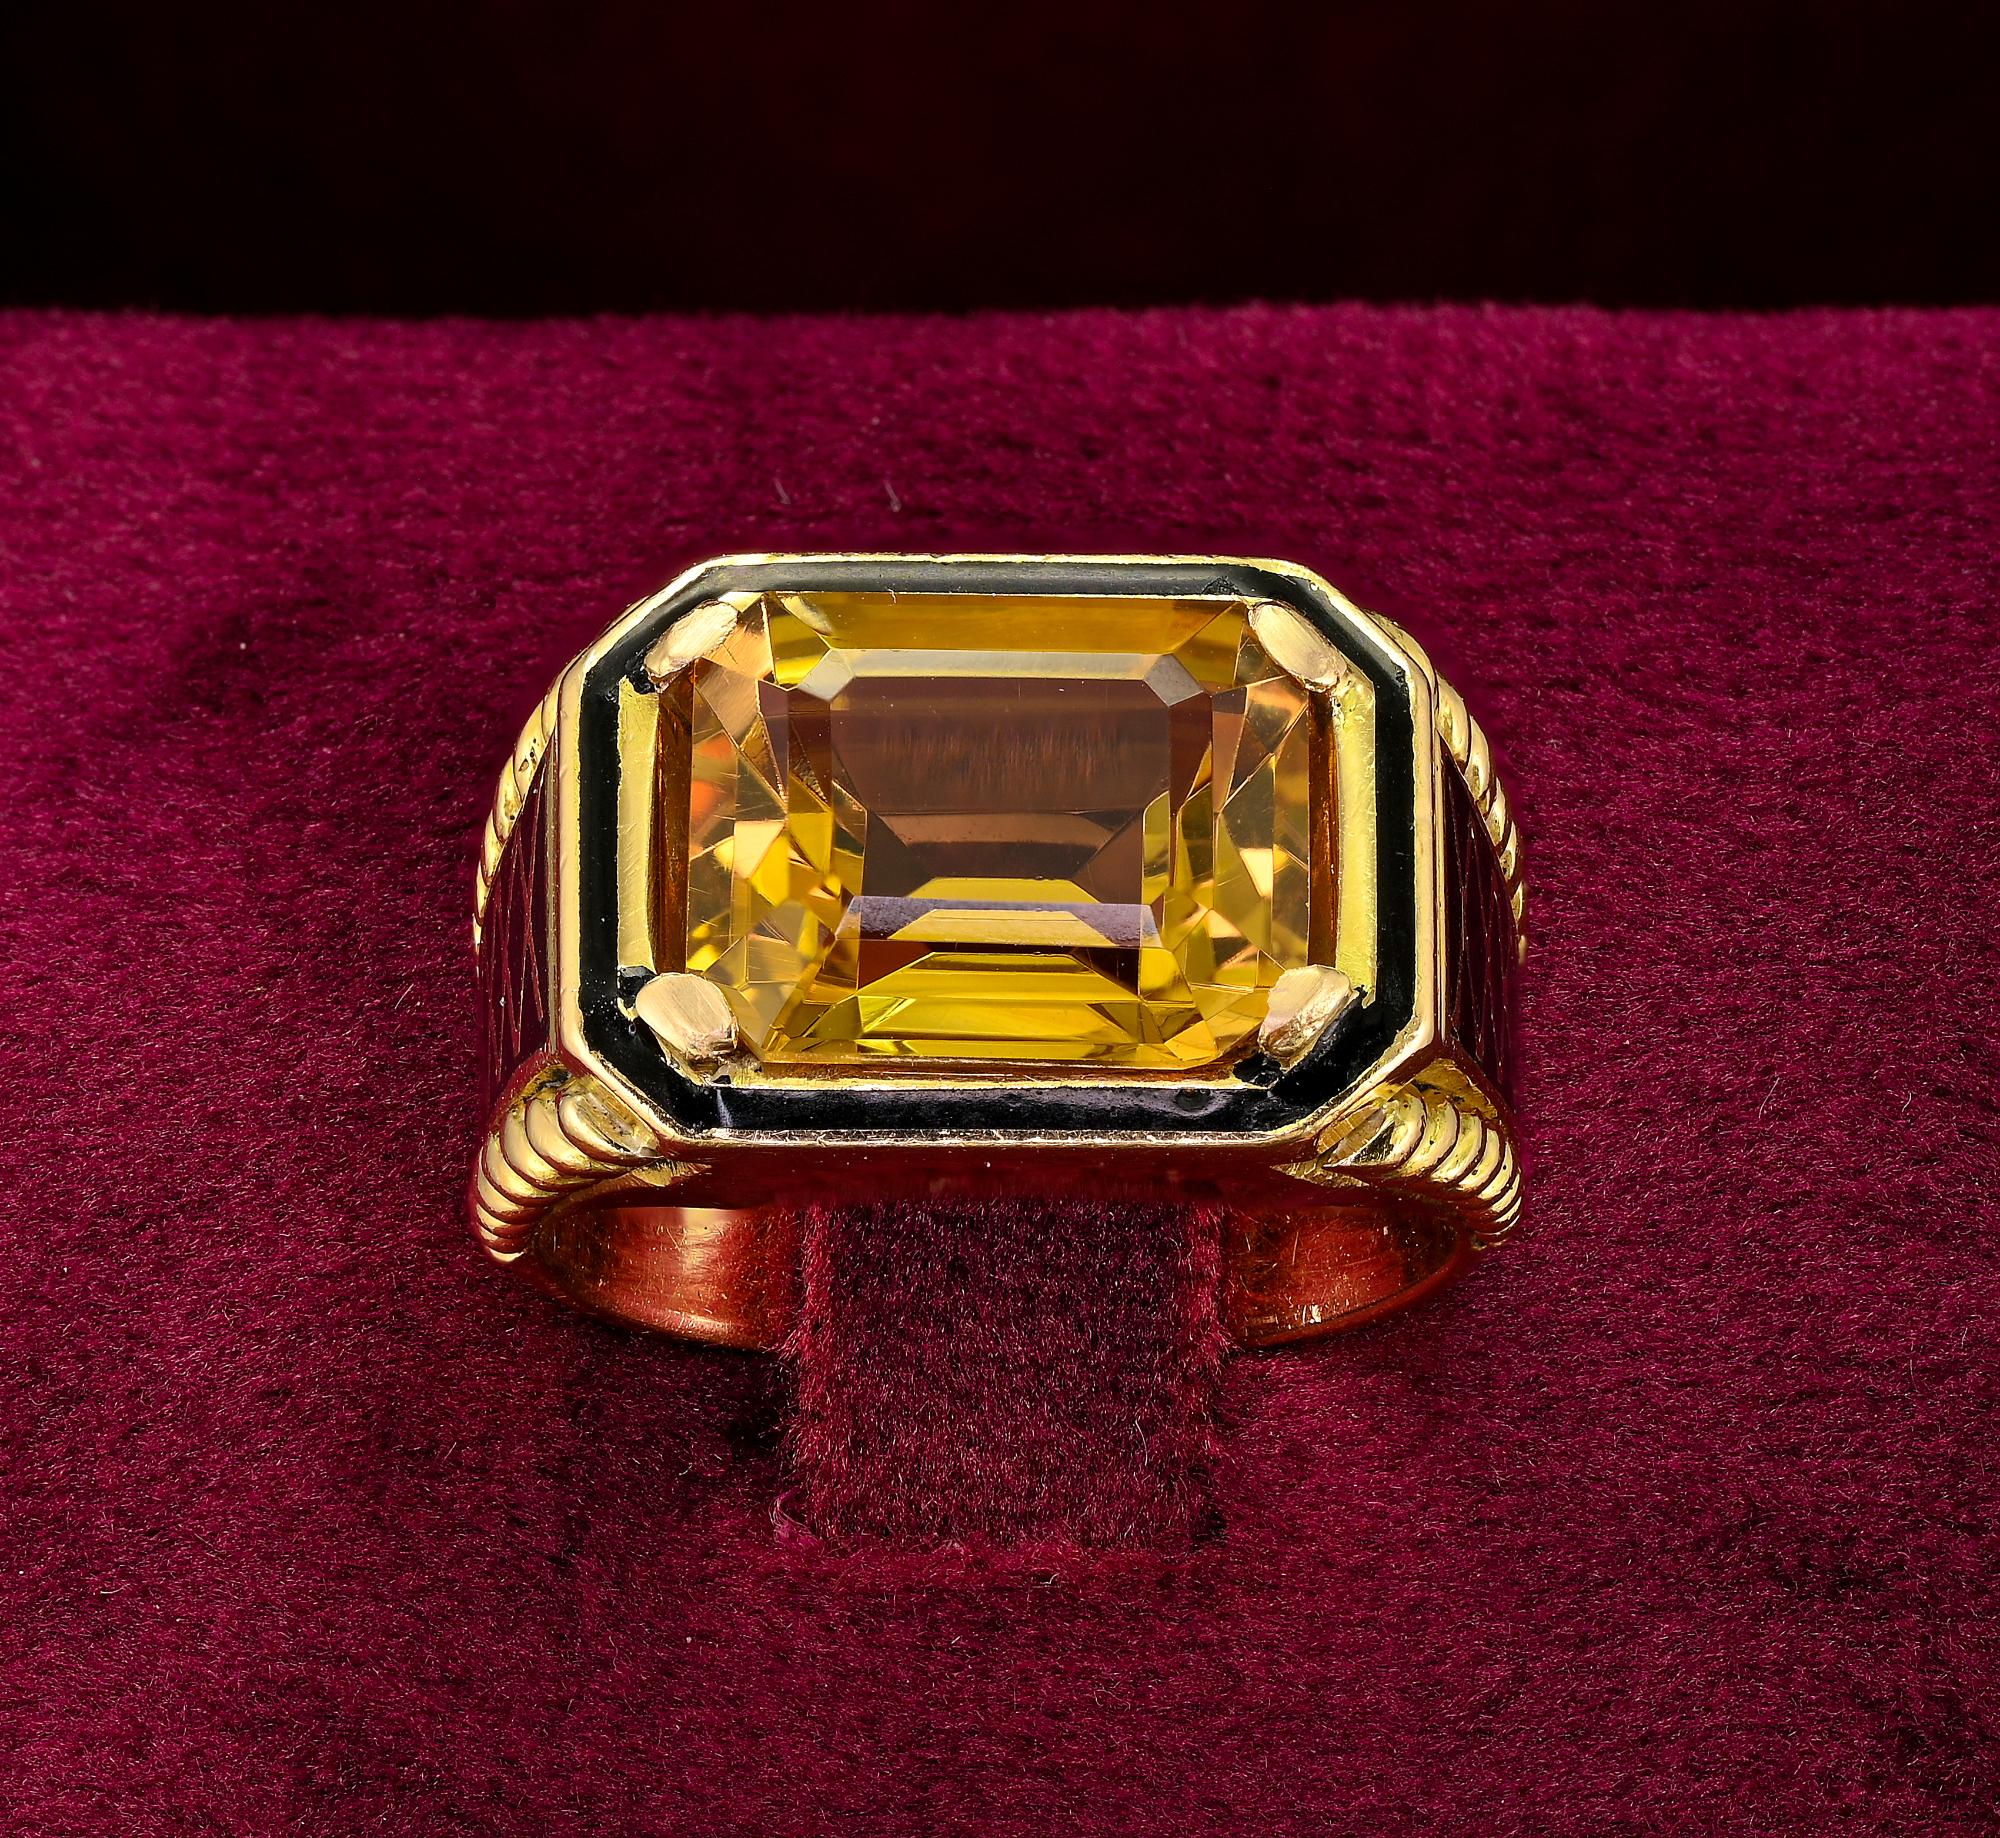 Marvelous Retro Italian ring 1940 circa
Individually hand crafted as unique of solid 18 KT, 13.9 grams in weight
Fascinating unique design shaped in horizontal octagonal head with black enameling framing the beautiful Citrine as main stone and